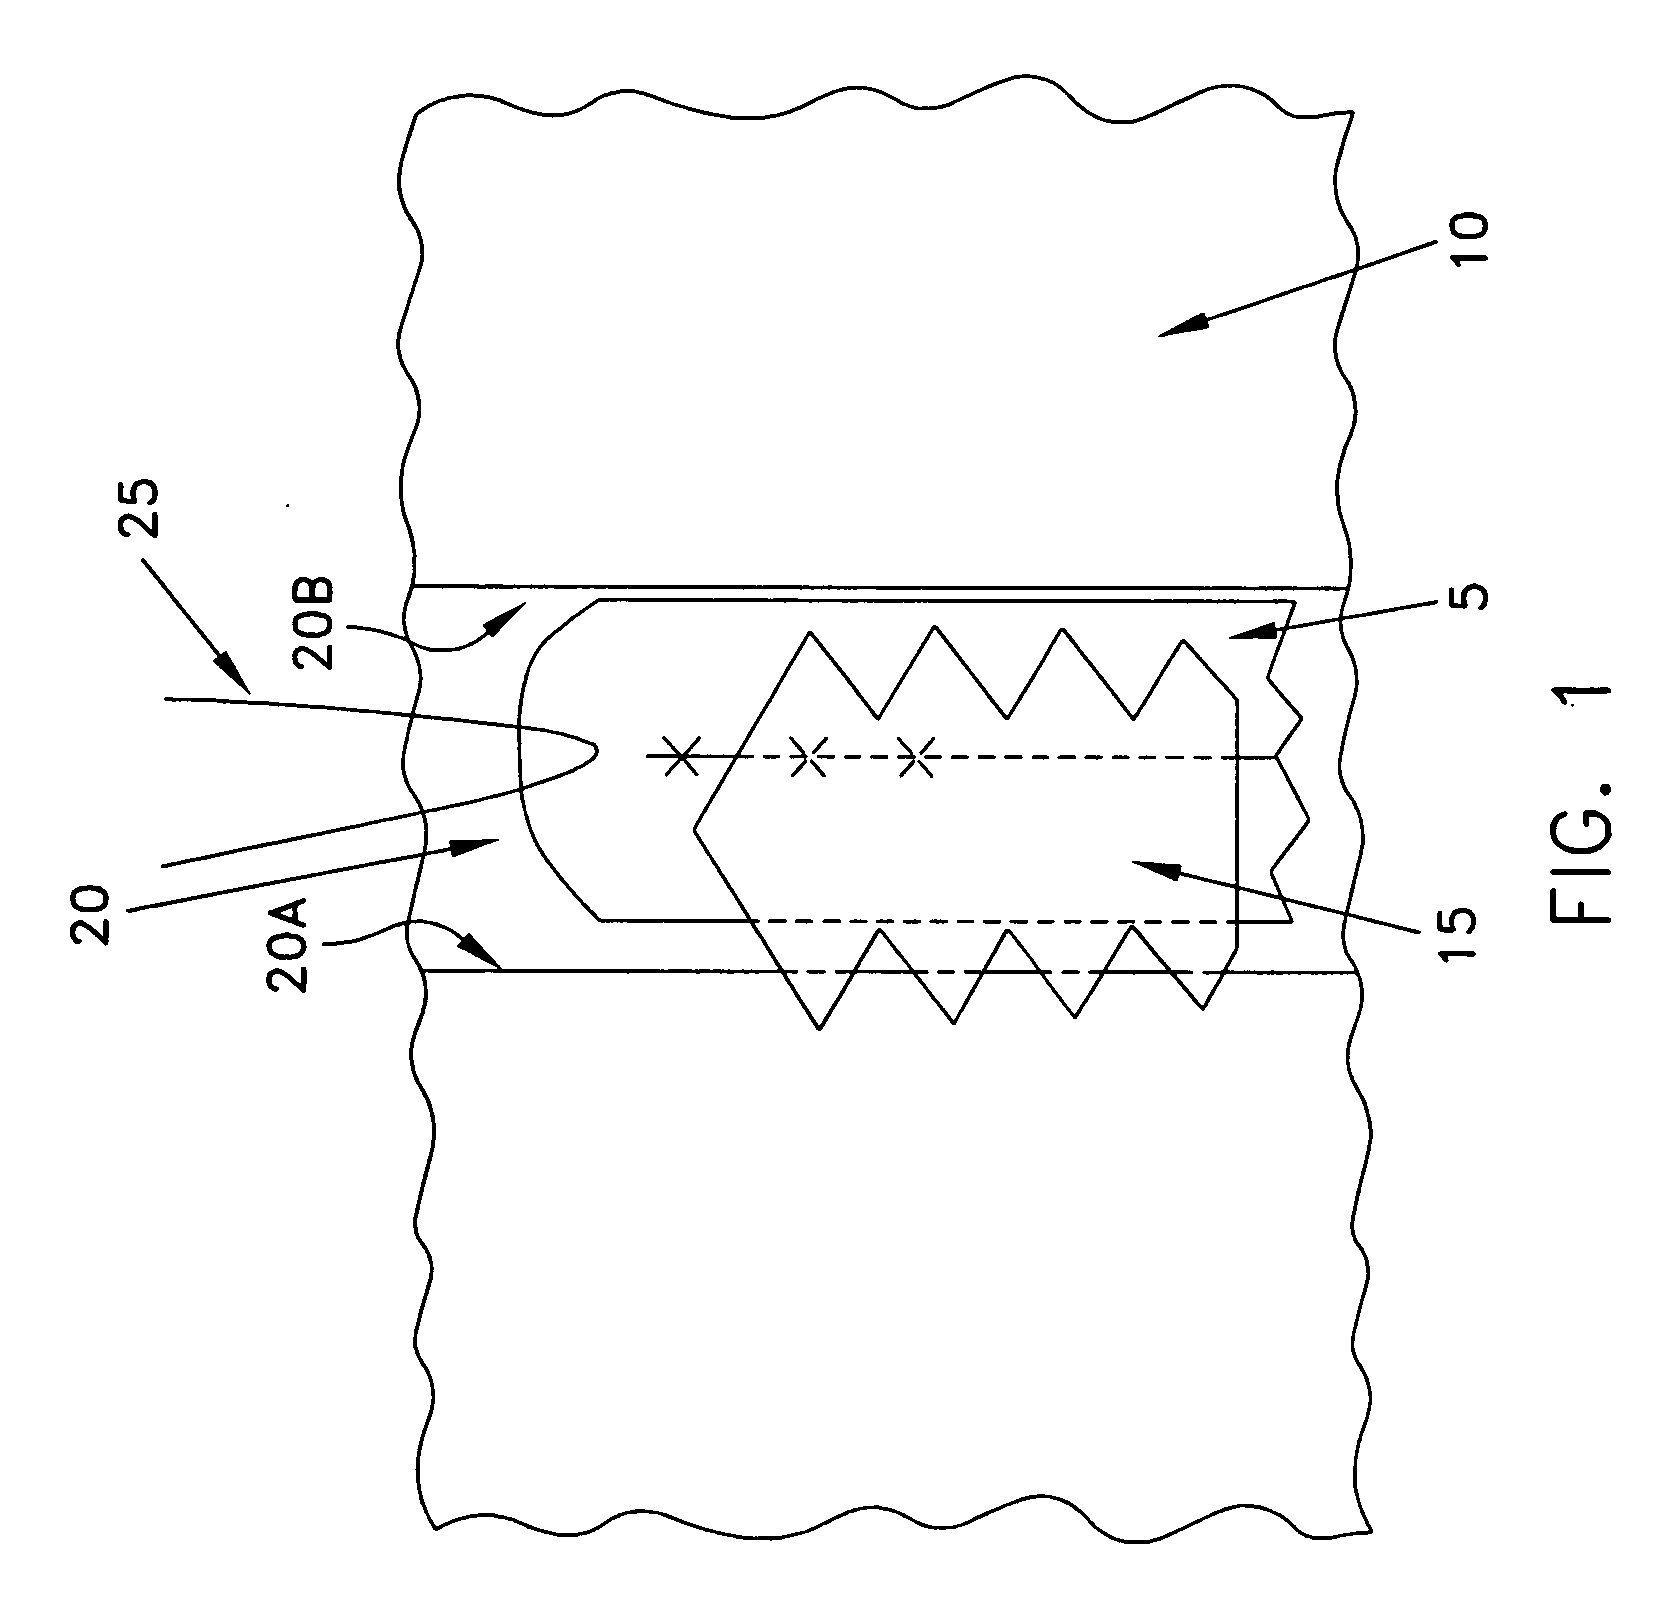 Composite interference screw for attaching a graft ligament to a bone, and other apparatus for making attachments to bone